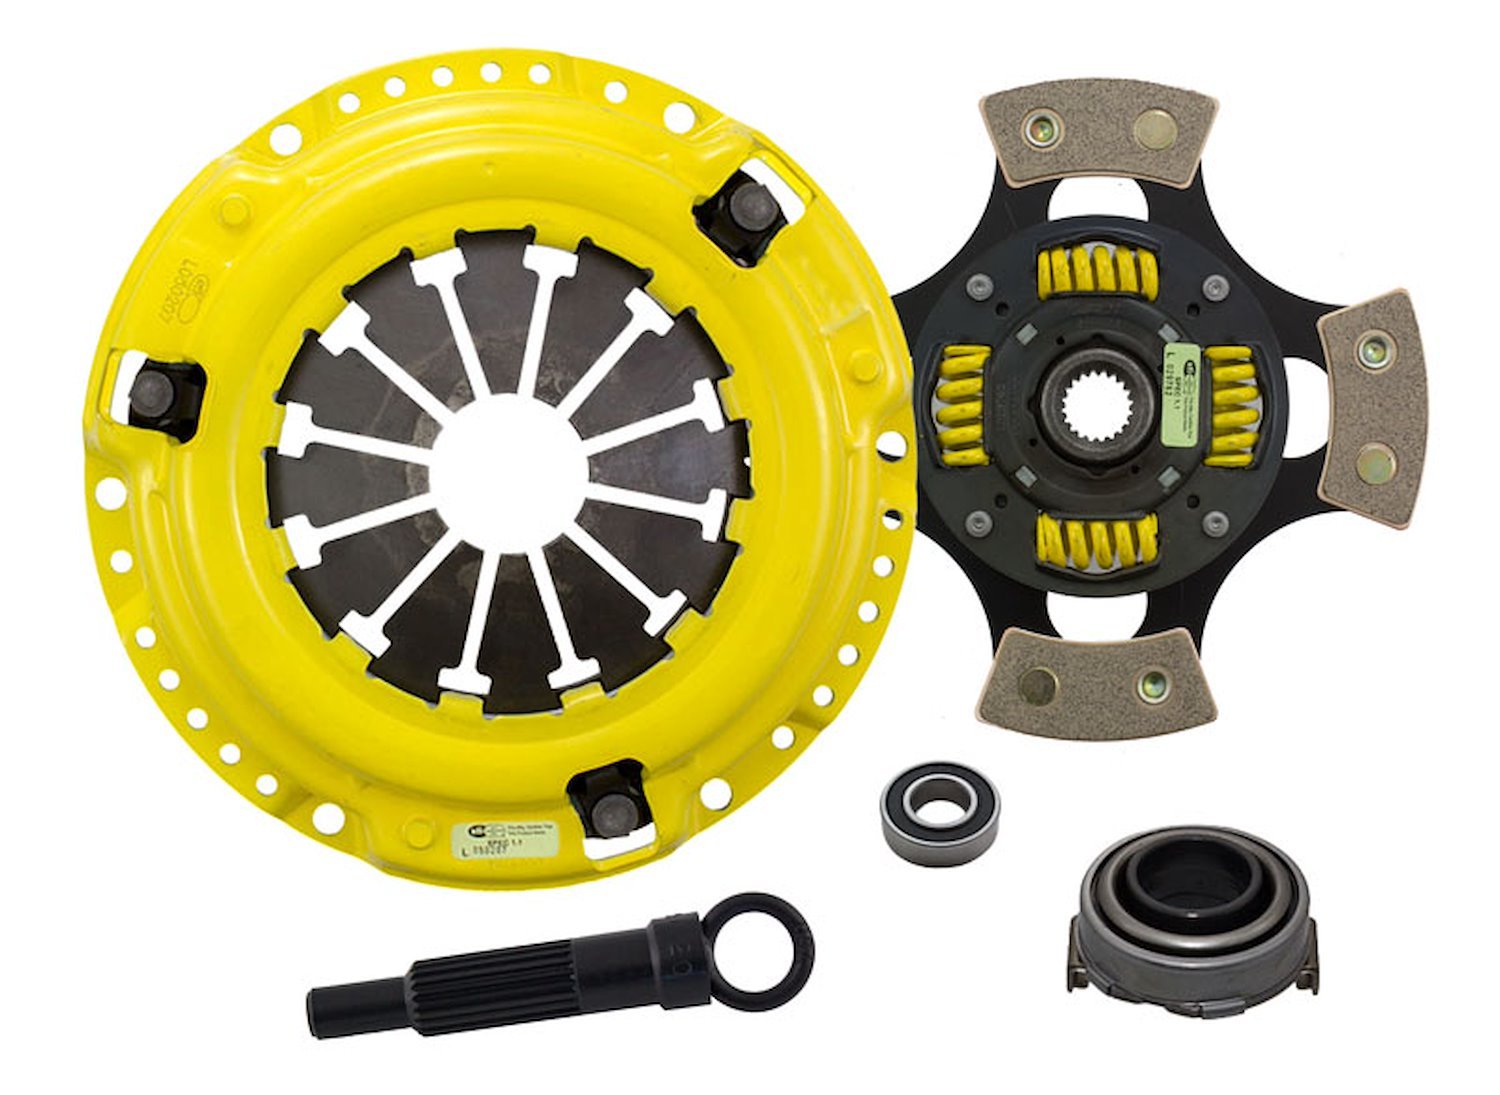 MaXX/Race Sprung 4-Pad Transmission Clutch Kit Fits Select